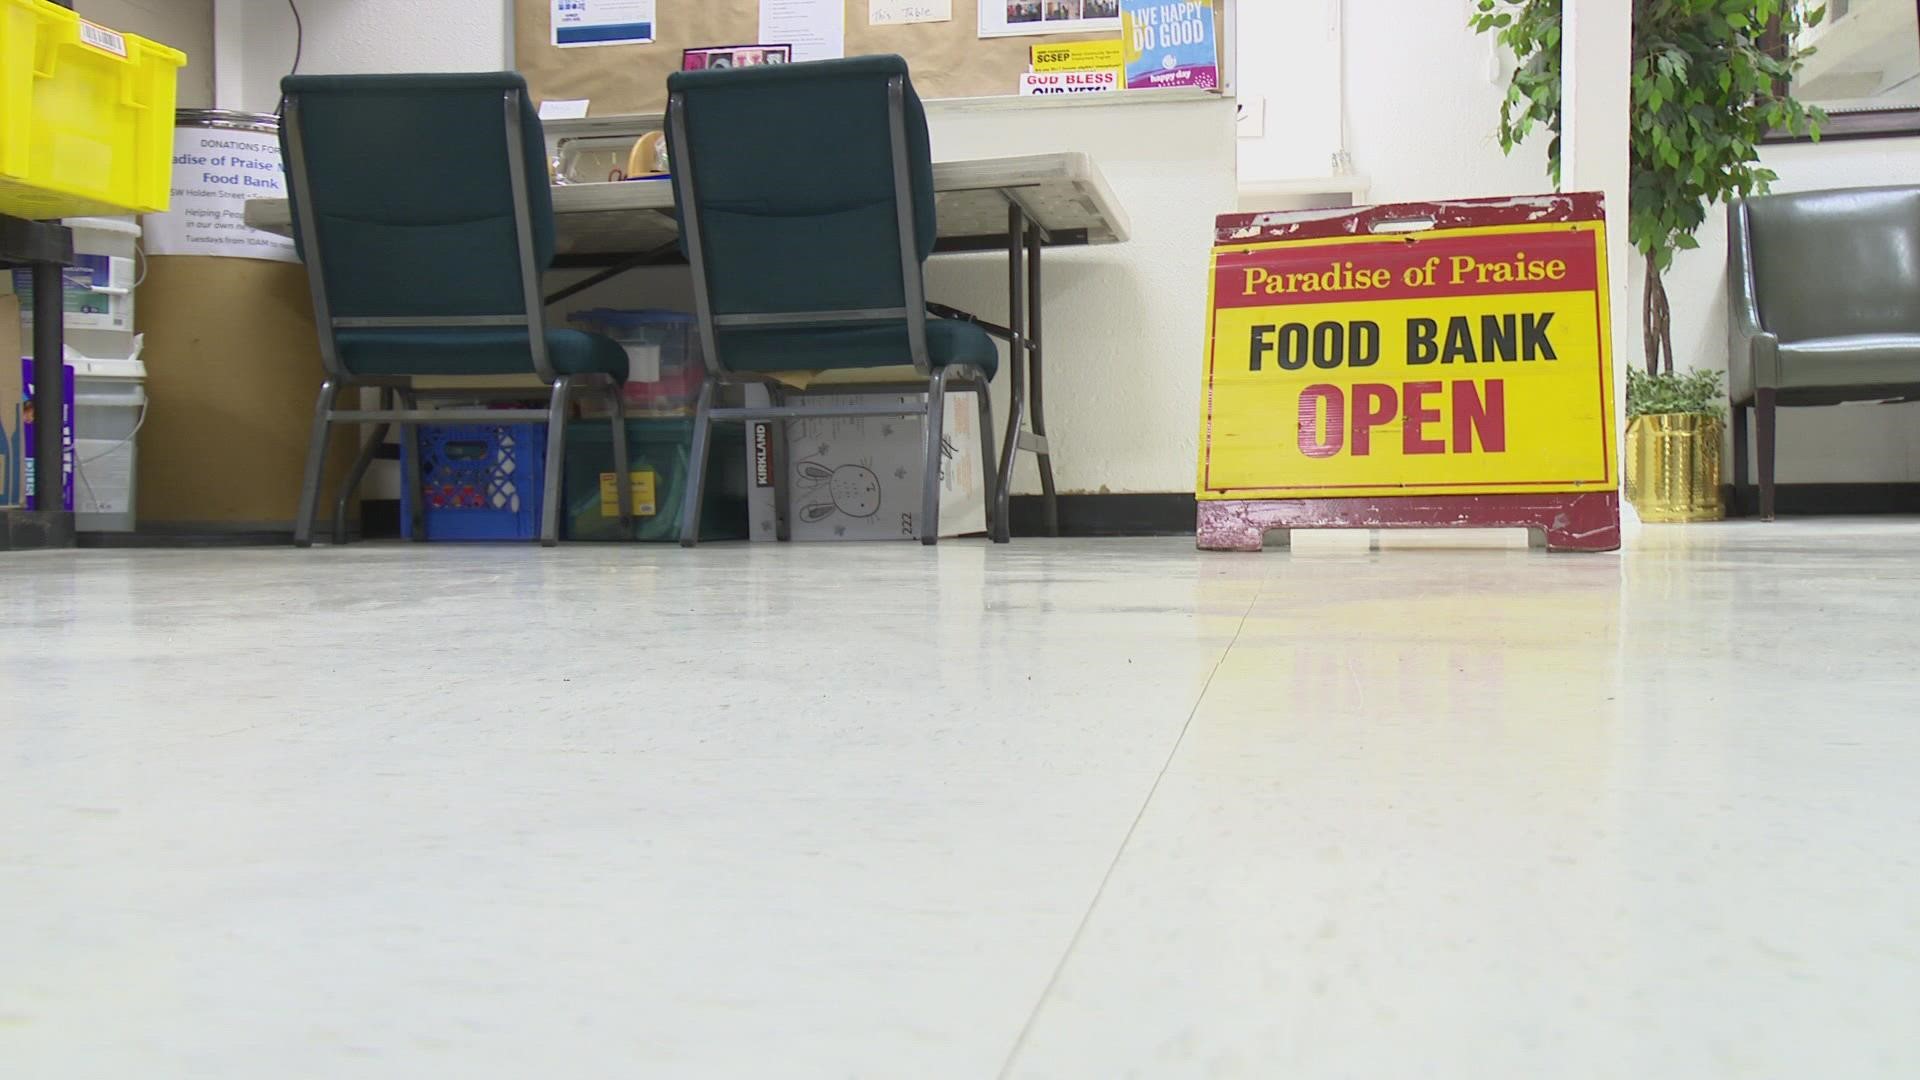 Demand for food banks is going up as inflation impacts prices.